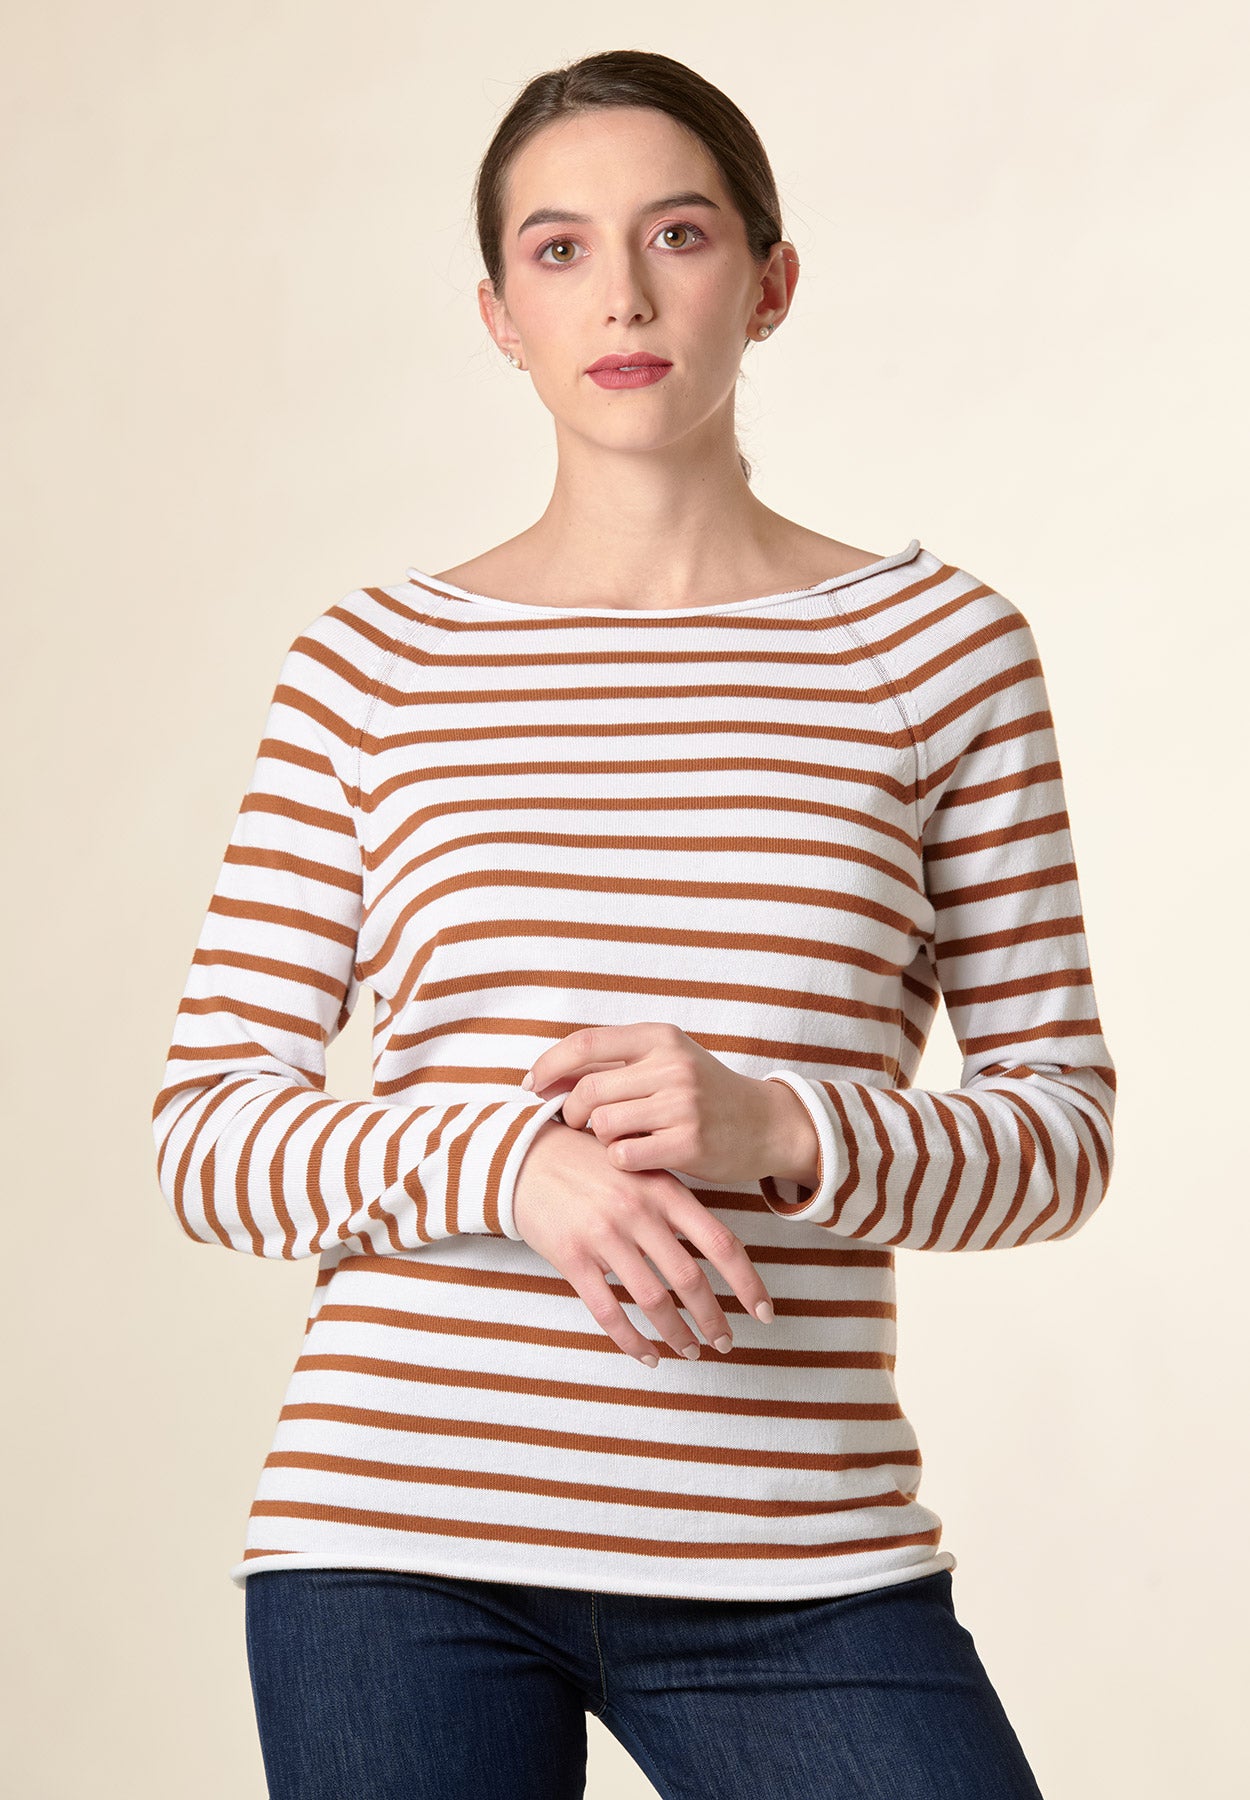 White-tobacco sweater boat stripes roll on